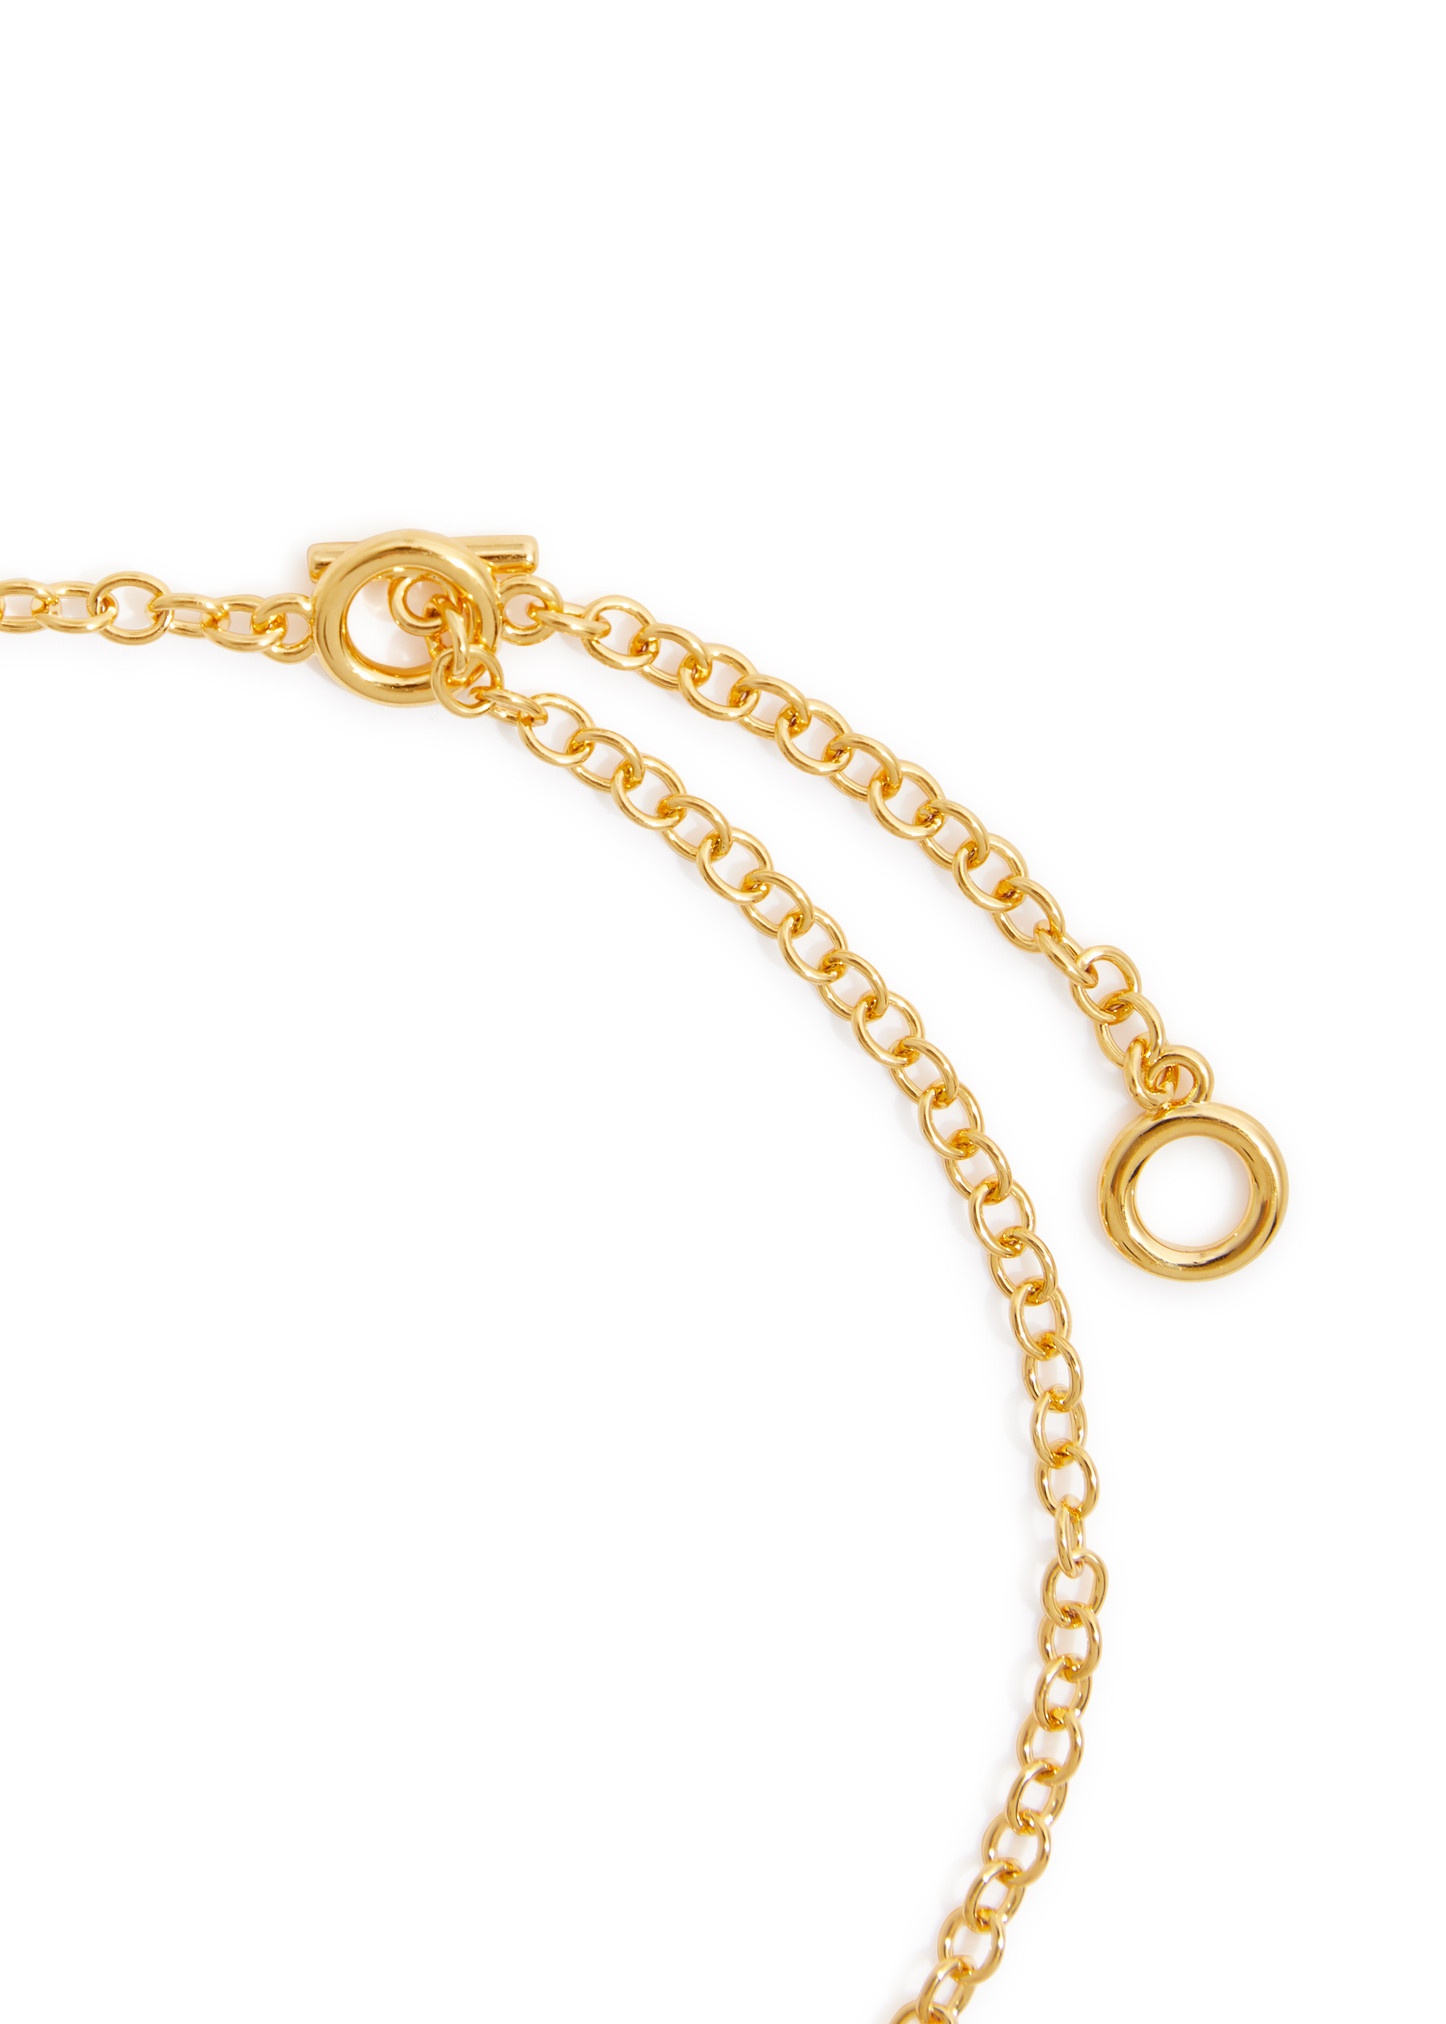 Bloom 12kt gold-plated necklace - 4